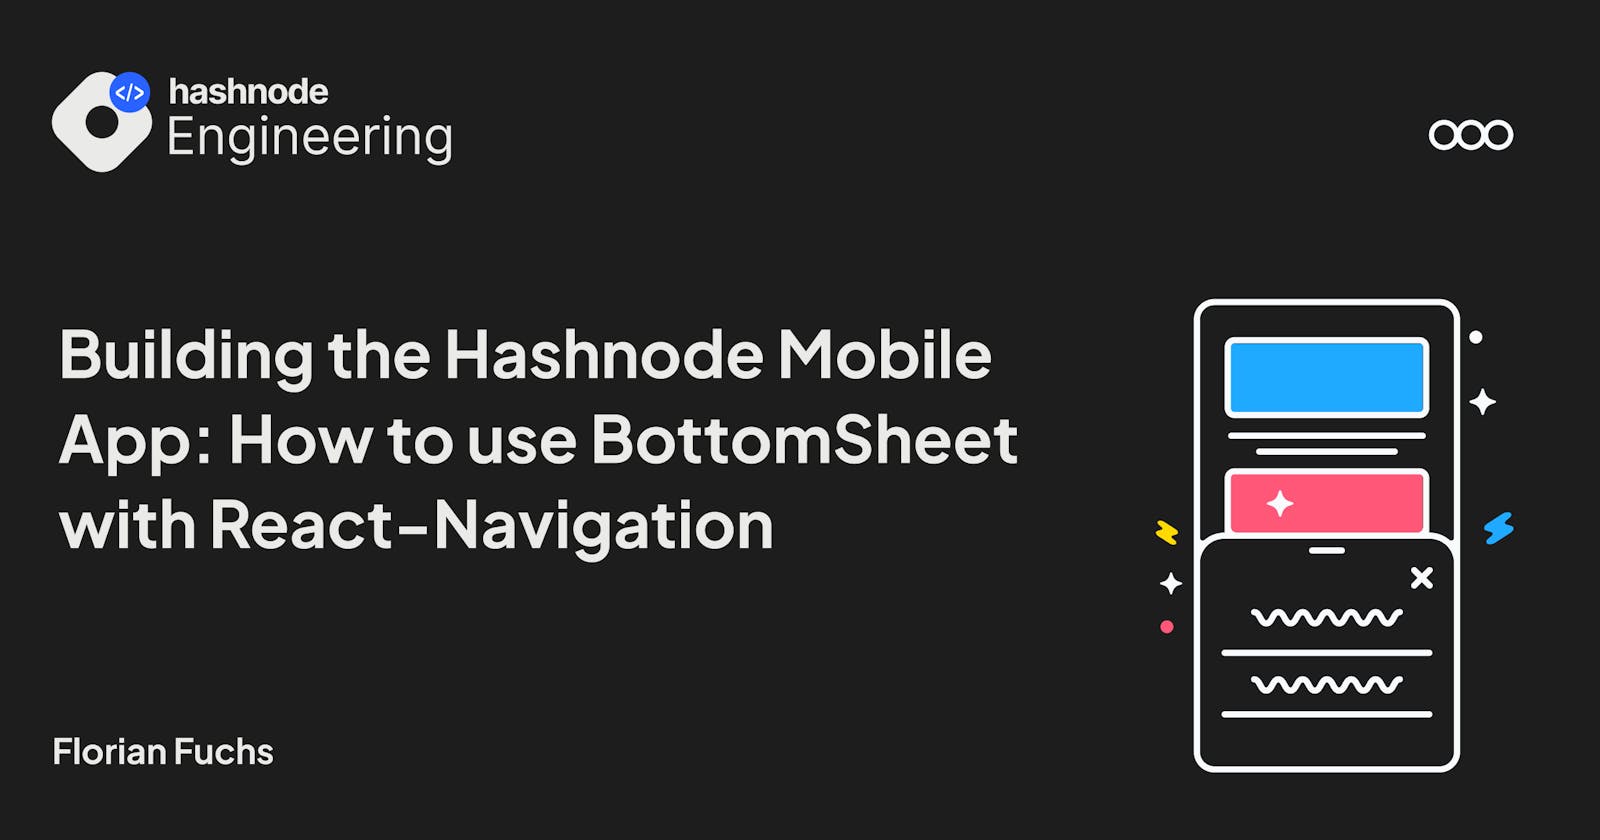 How To Use BottomSheet With React Navigation